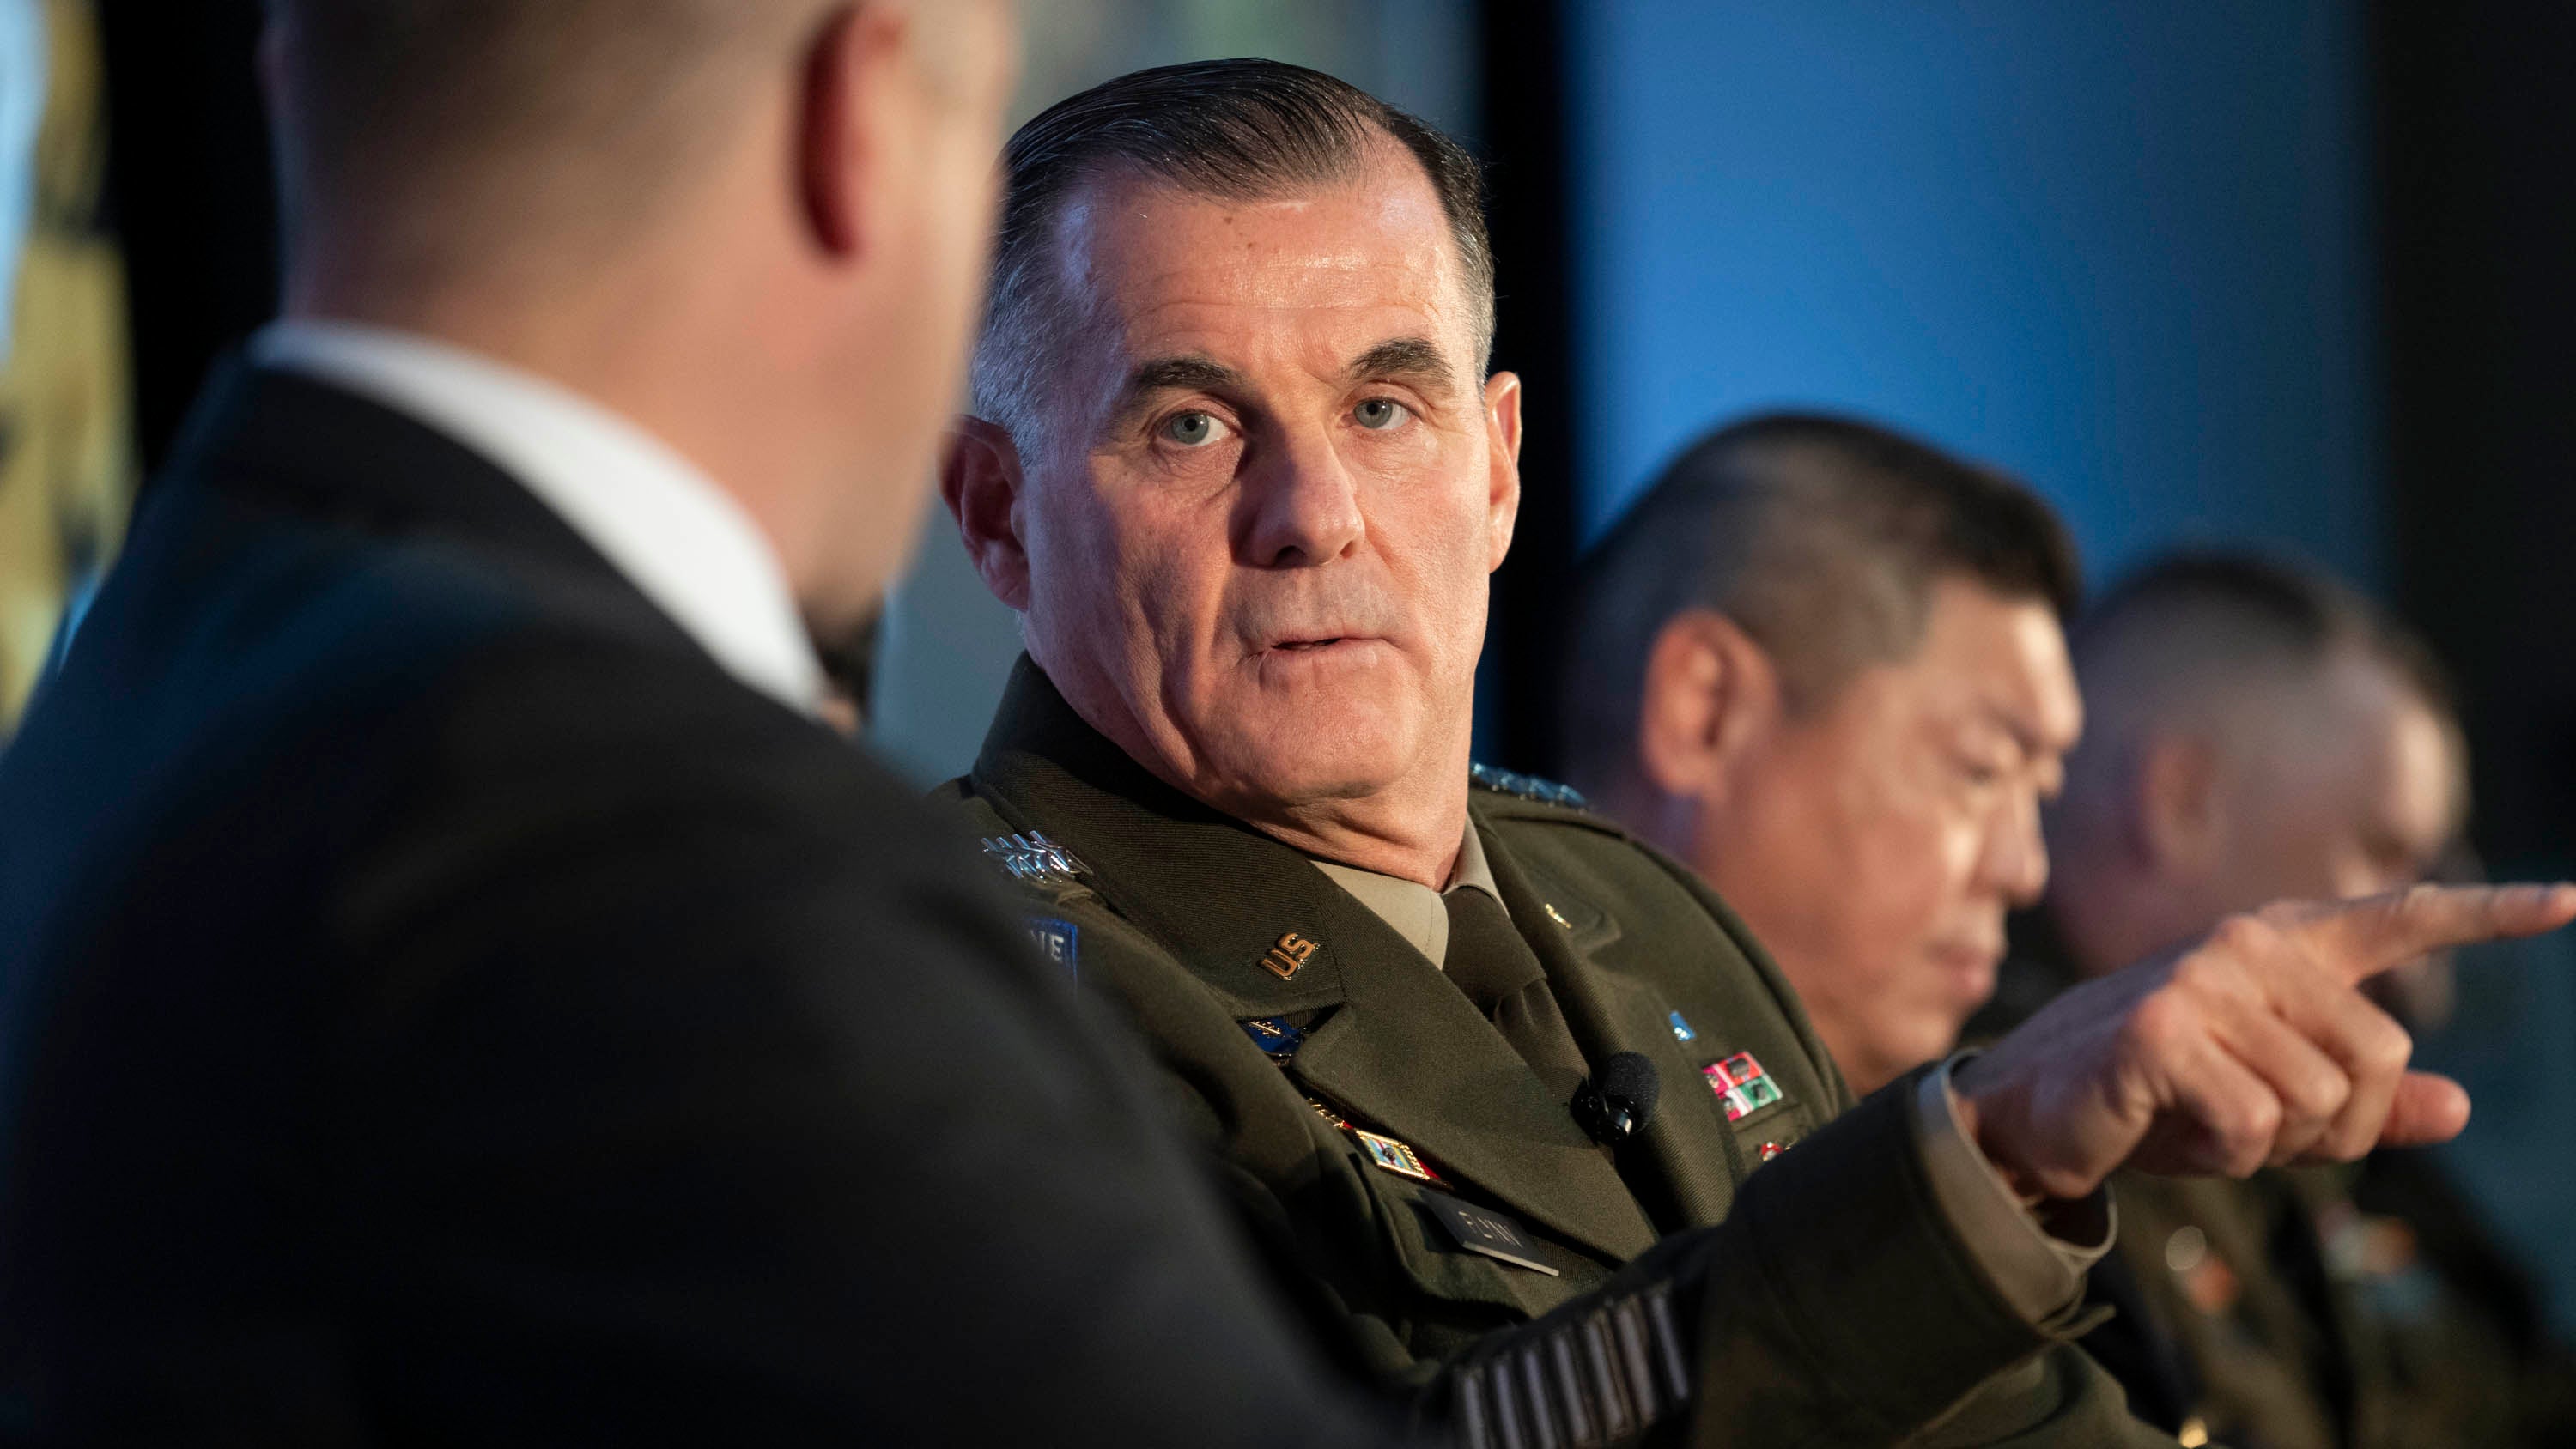 Gen. Charles Flynn, commanding general of US Army Pacific, speaks at the CMF: Landpower in the Indo-Pacific session at the AUSA 2023 Annual Meeting in Washington, D.C., Tuesday, Oct. 10, 2023. (Carol Guzy for AUSA)